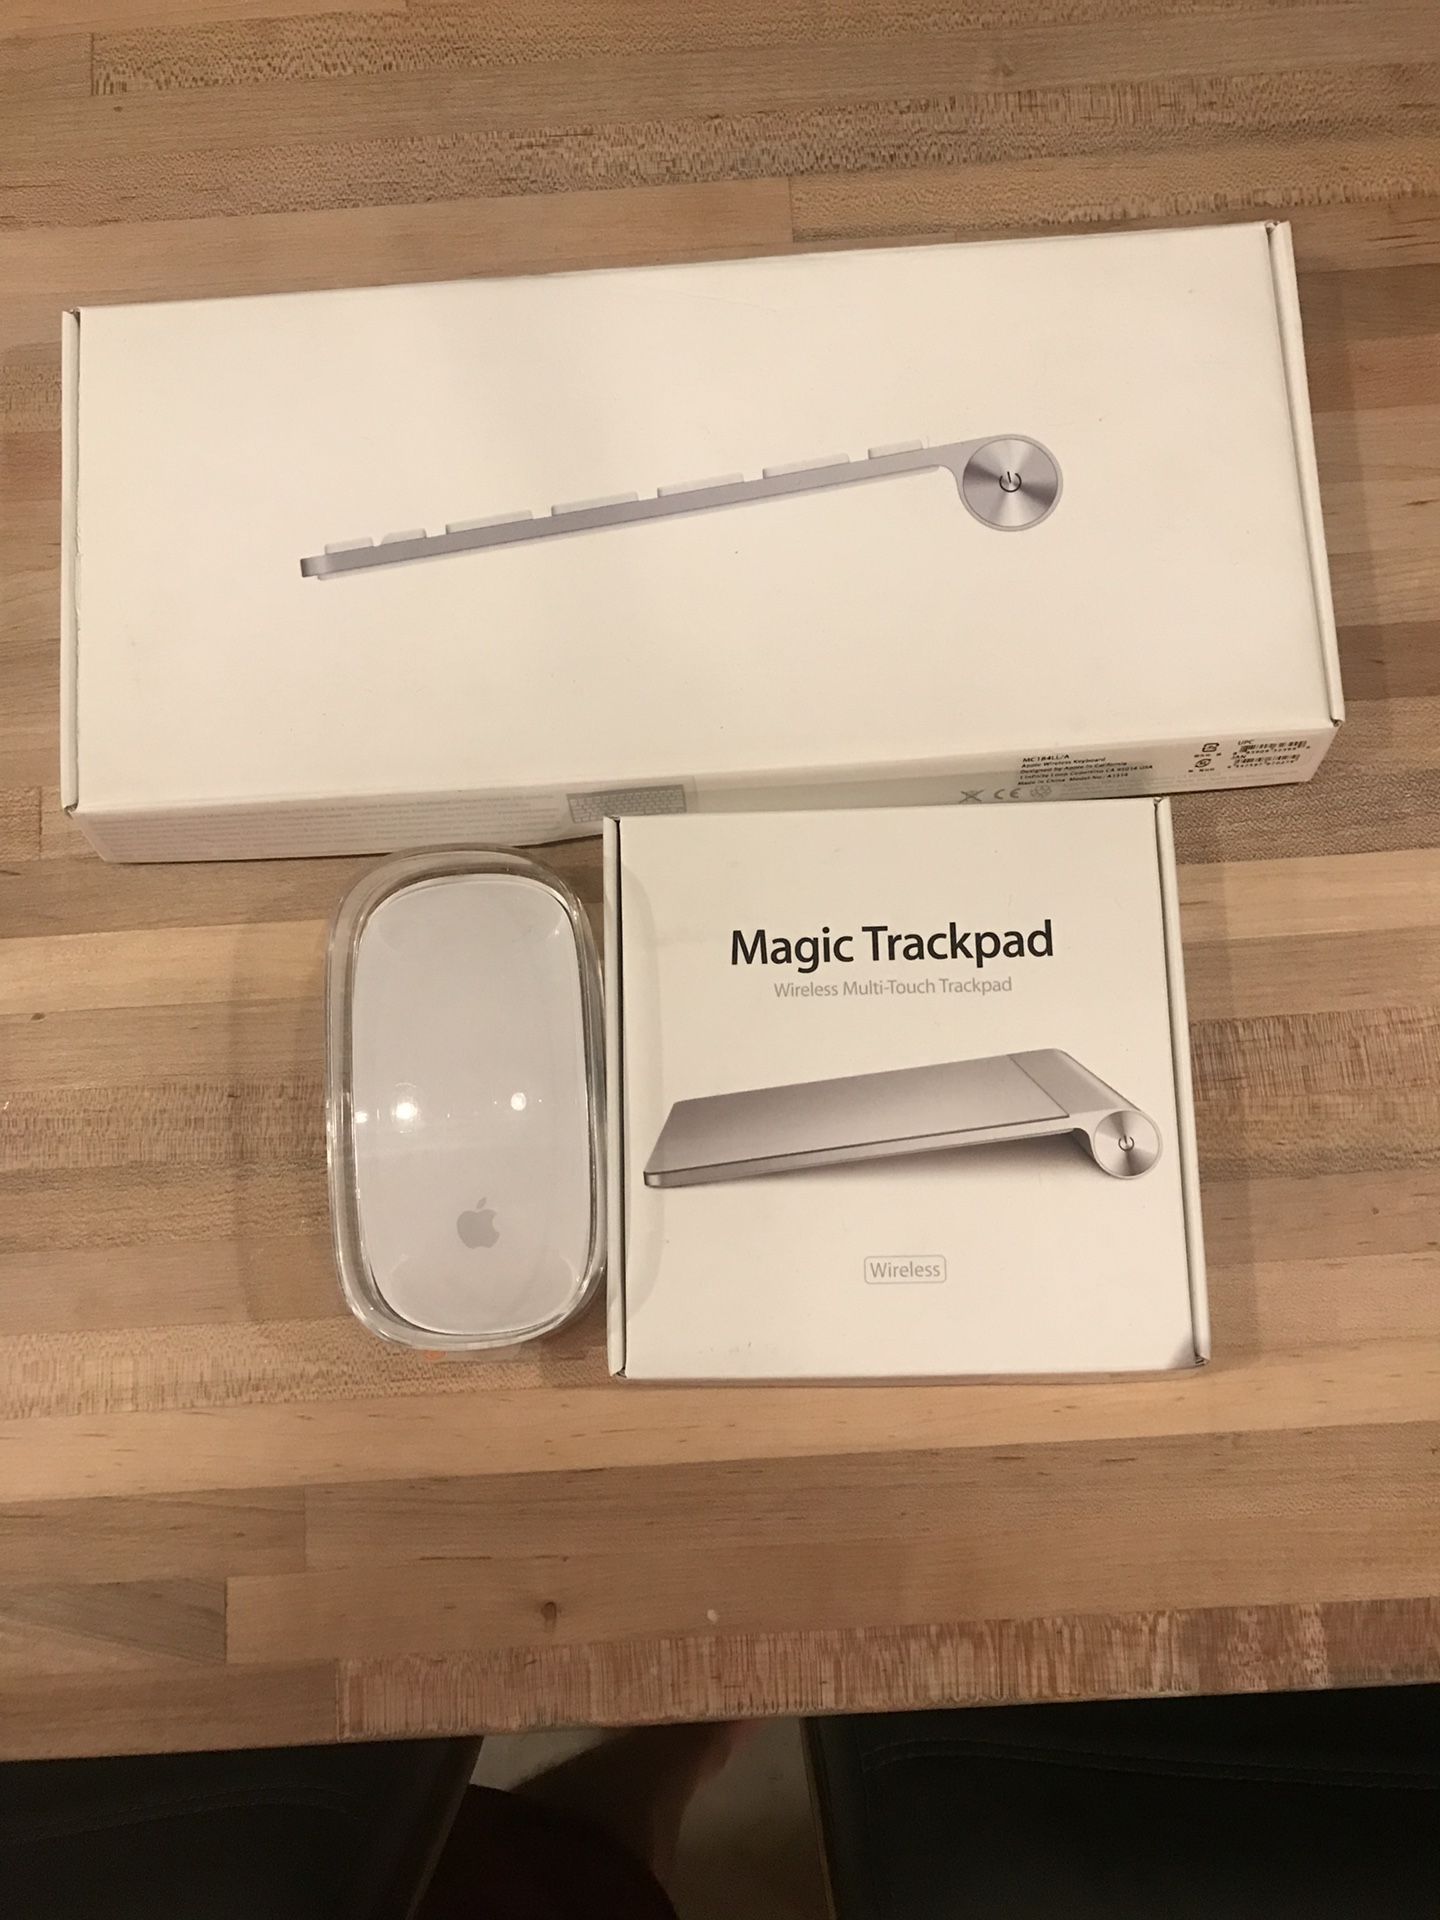 Apple wireless mouse, trackpad, and keyboard